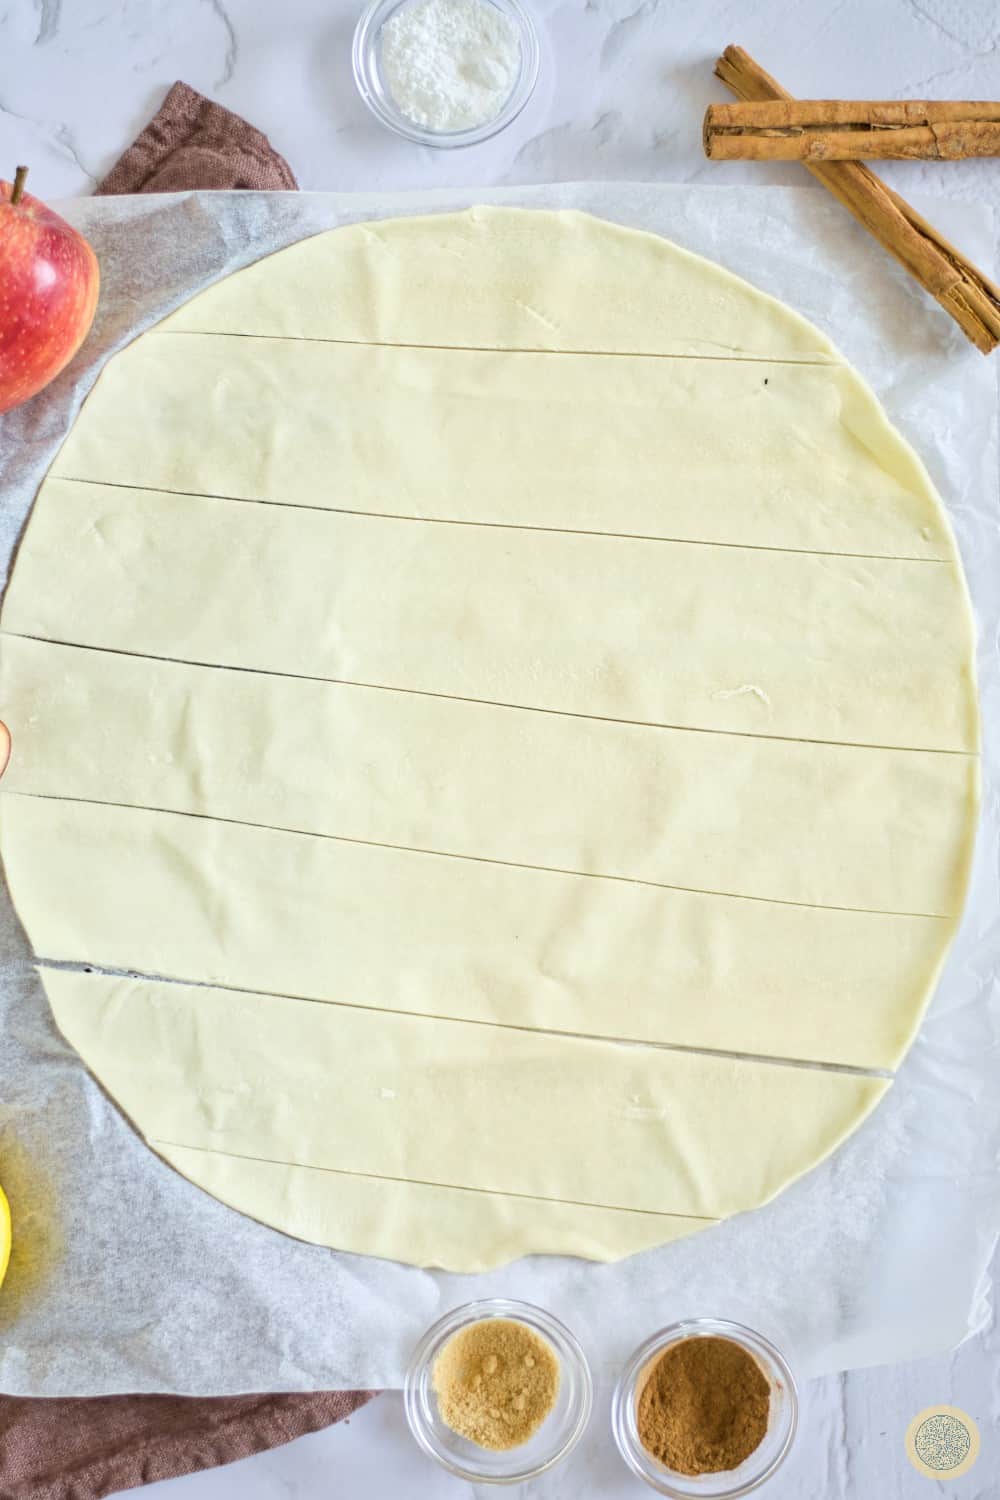 Unwrap your thawed puff pastry and place it onto a cleaned surface.